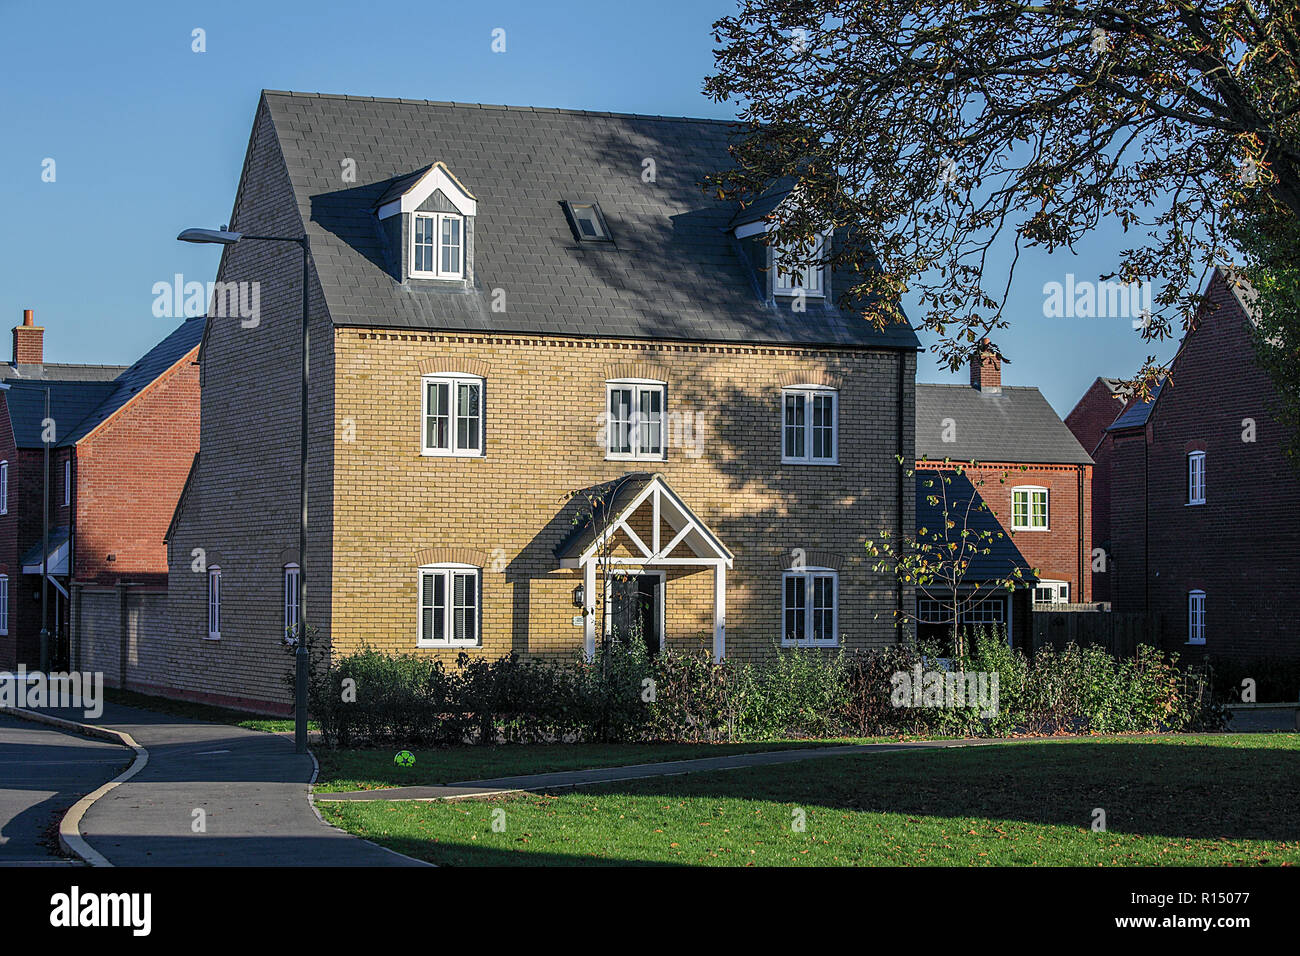 New build homes and construction site relating to Berryfields, an development of hundreds of homes just outside Aylesbury in Buckinghamshire, England. Stock Photo